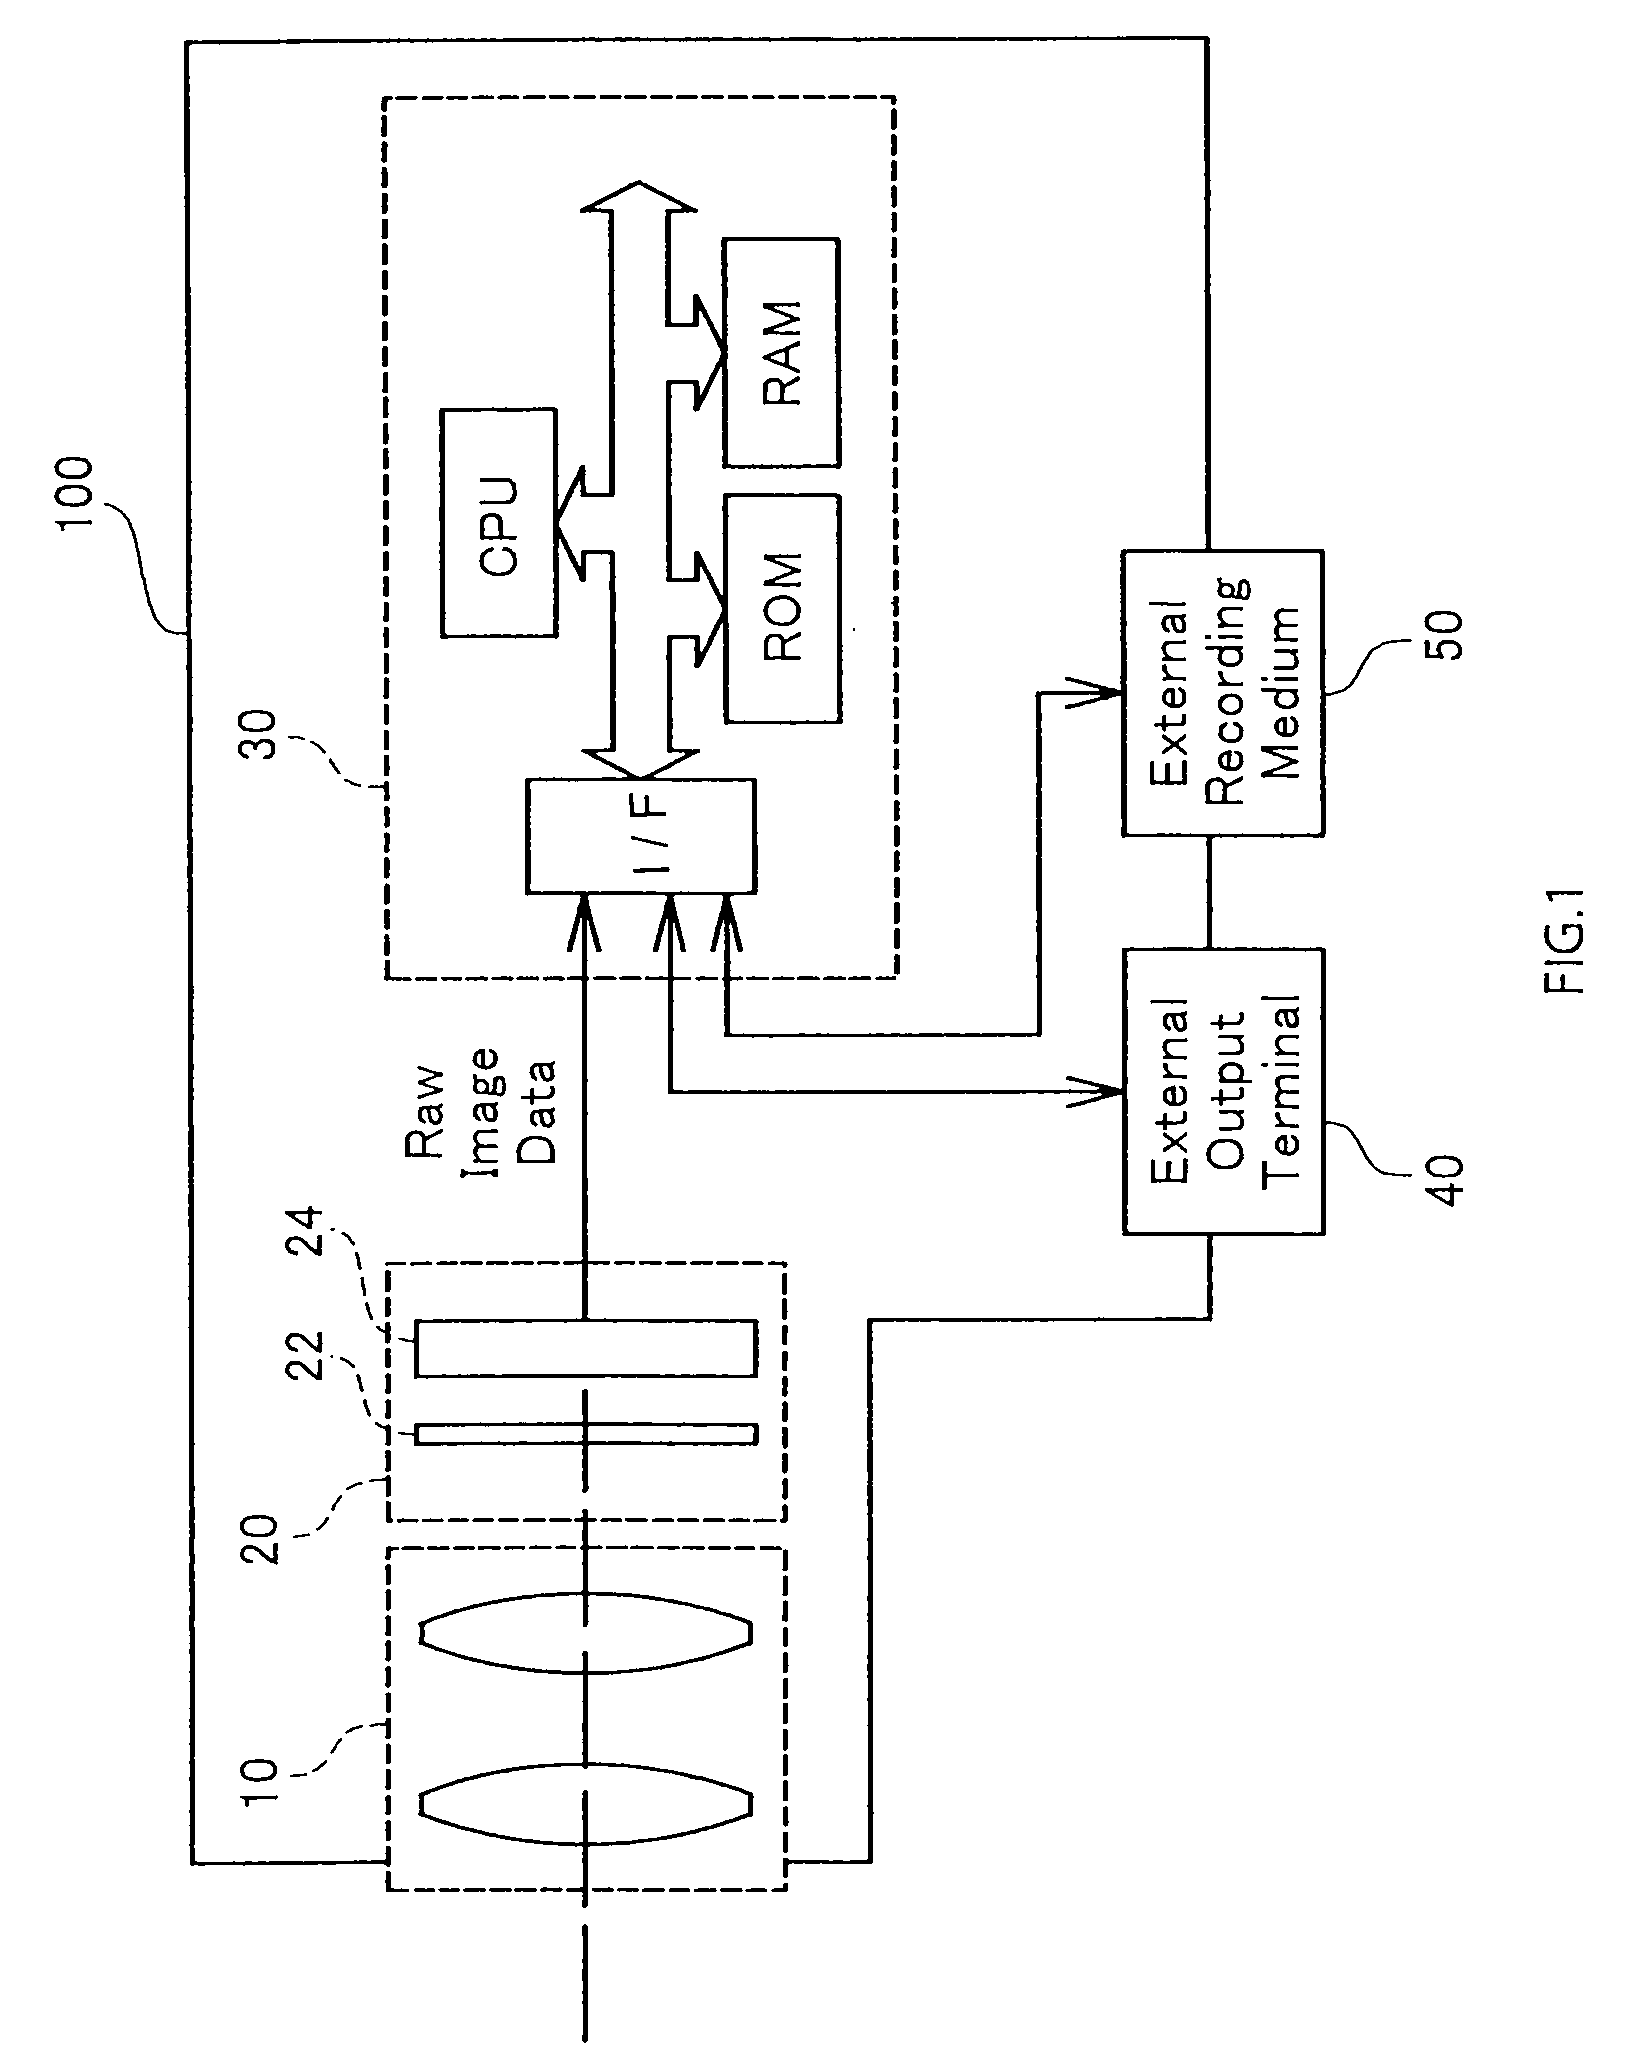 Image Processing Apparatus, Image Processing Method, And Program For Attaining Image Processing